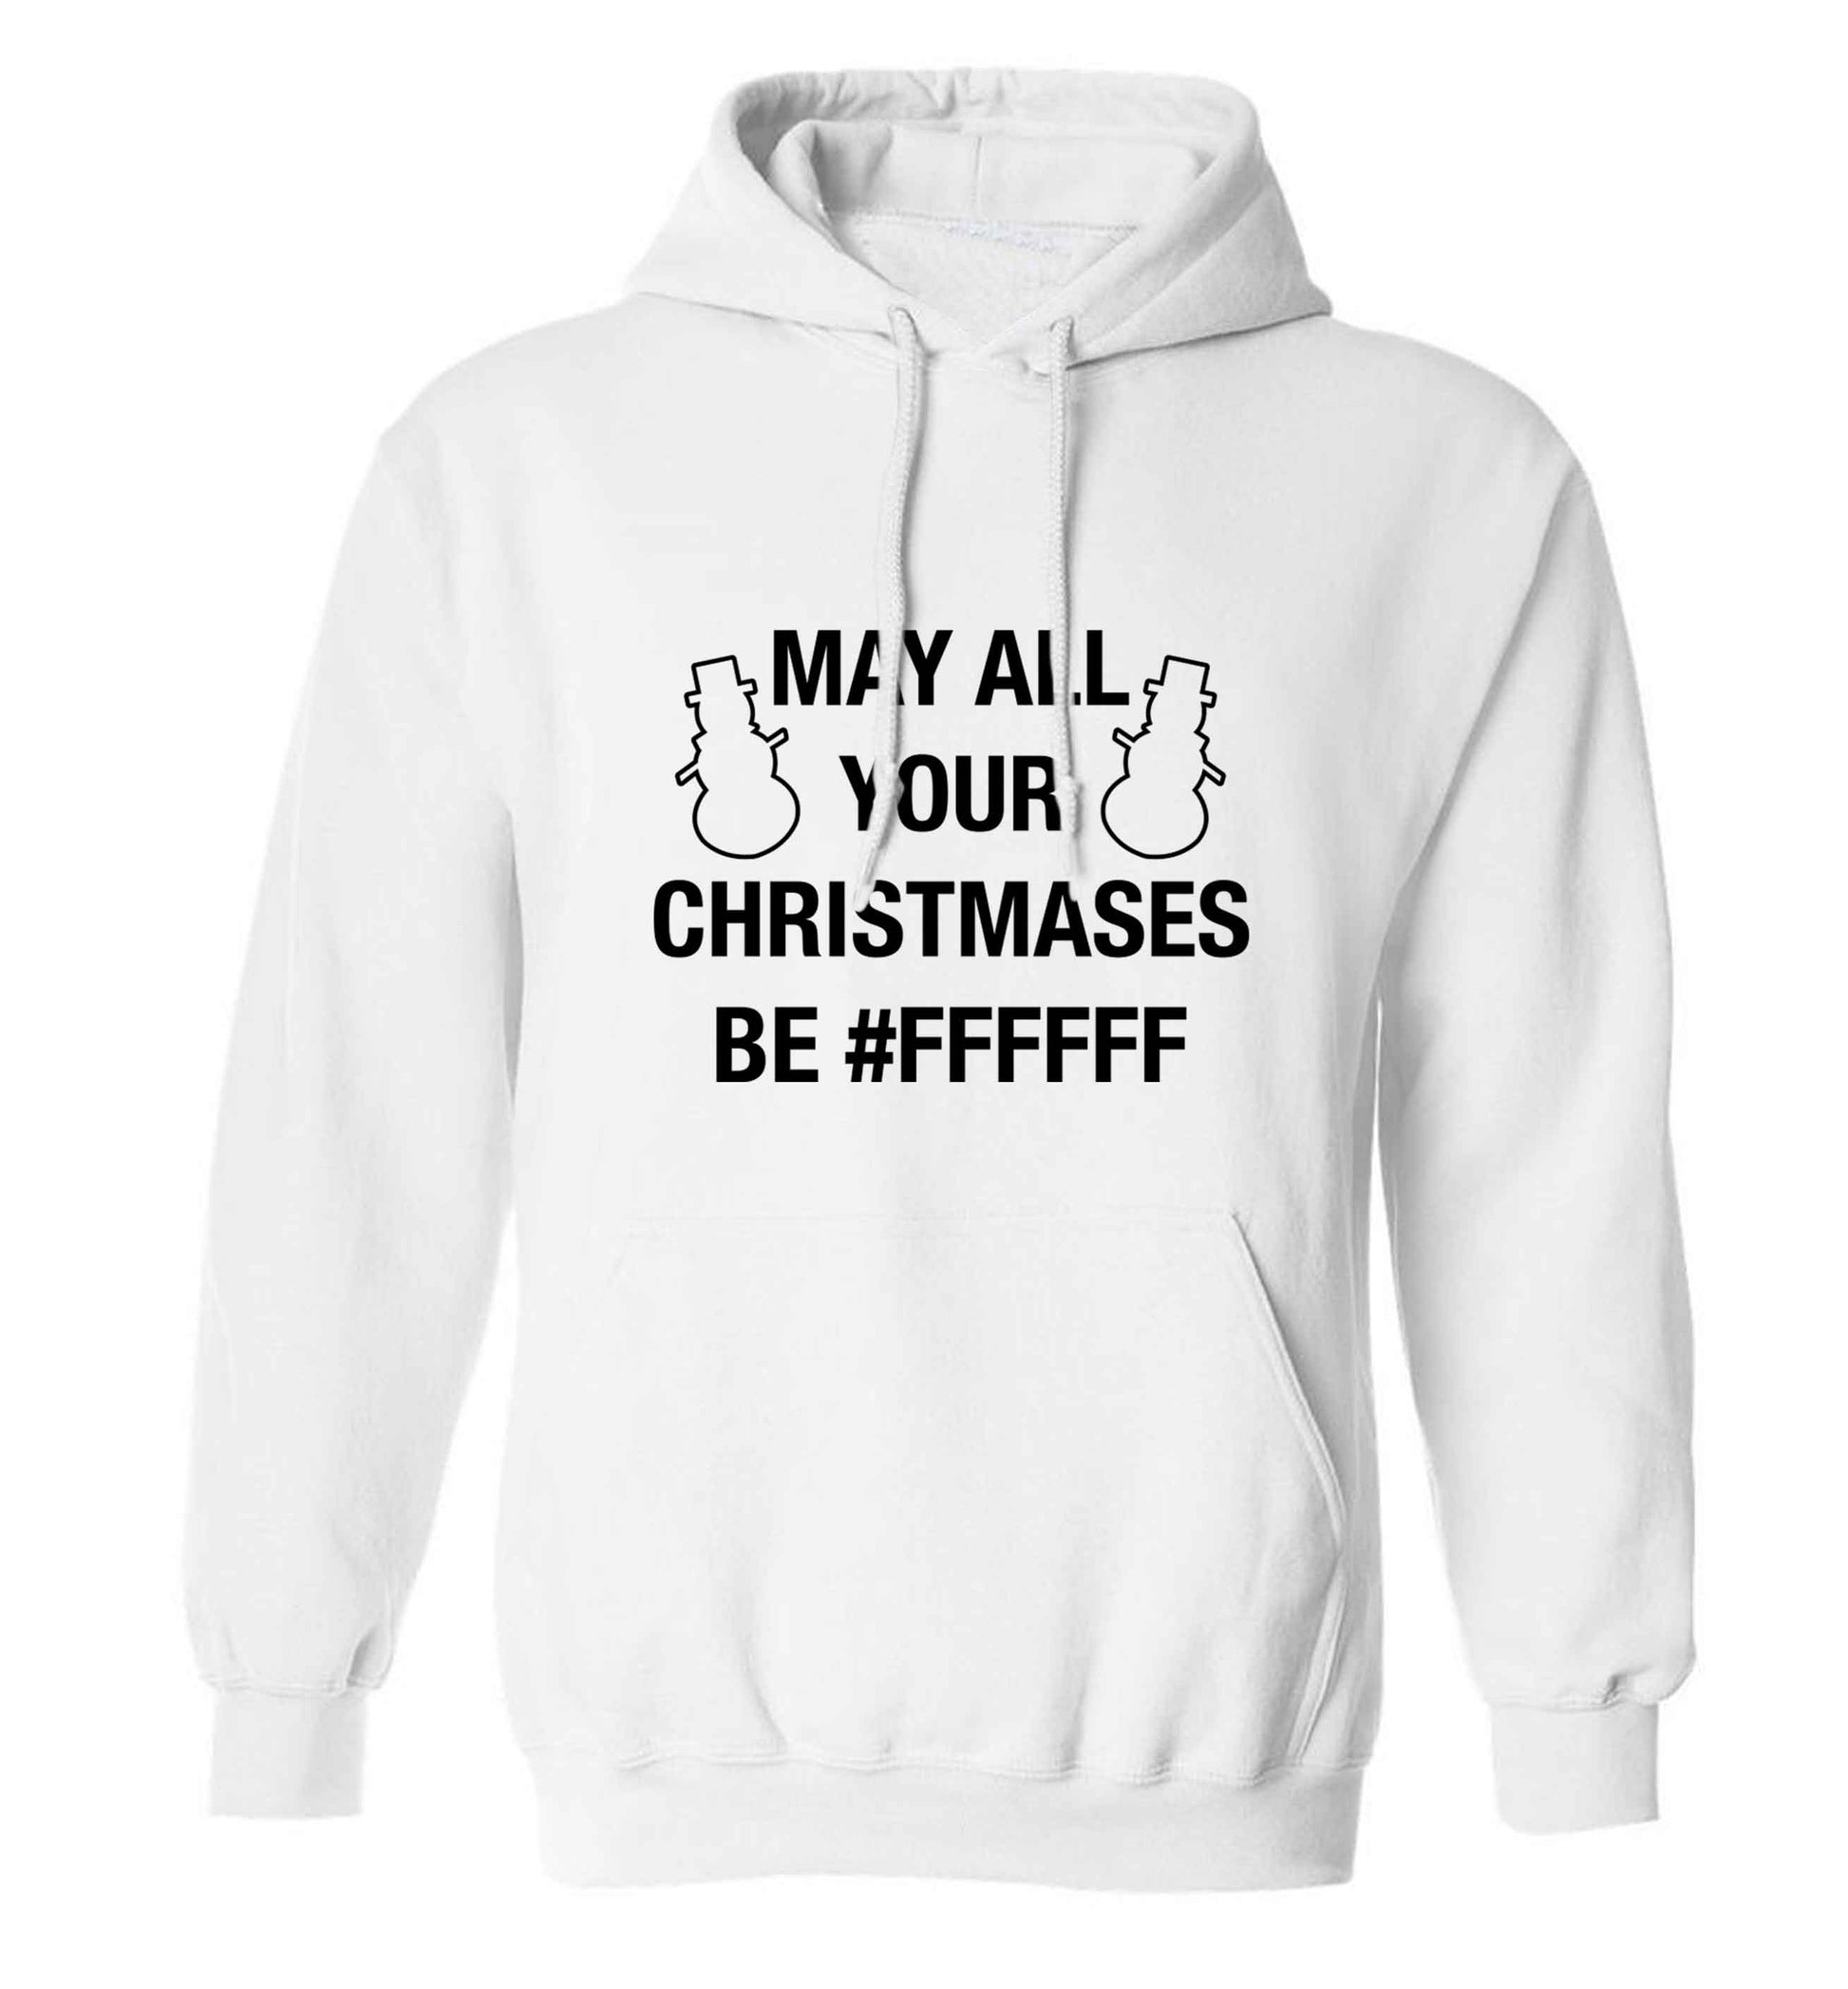 May all your Christmases be #FFFFFF adults unisex white hoodie 2XL